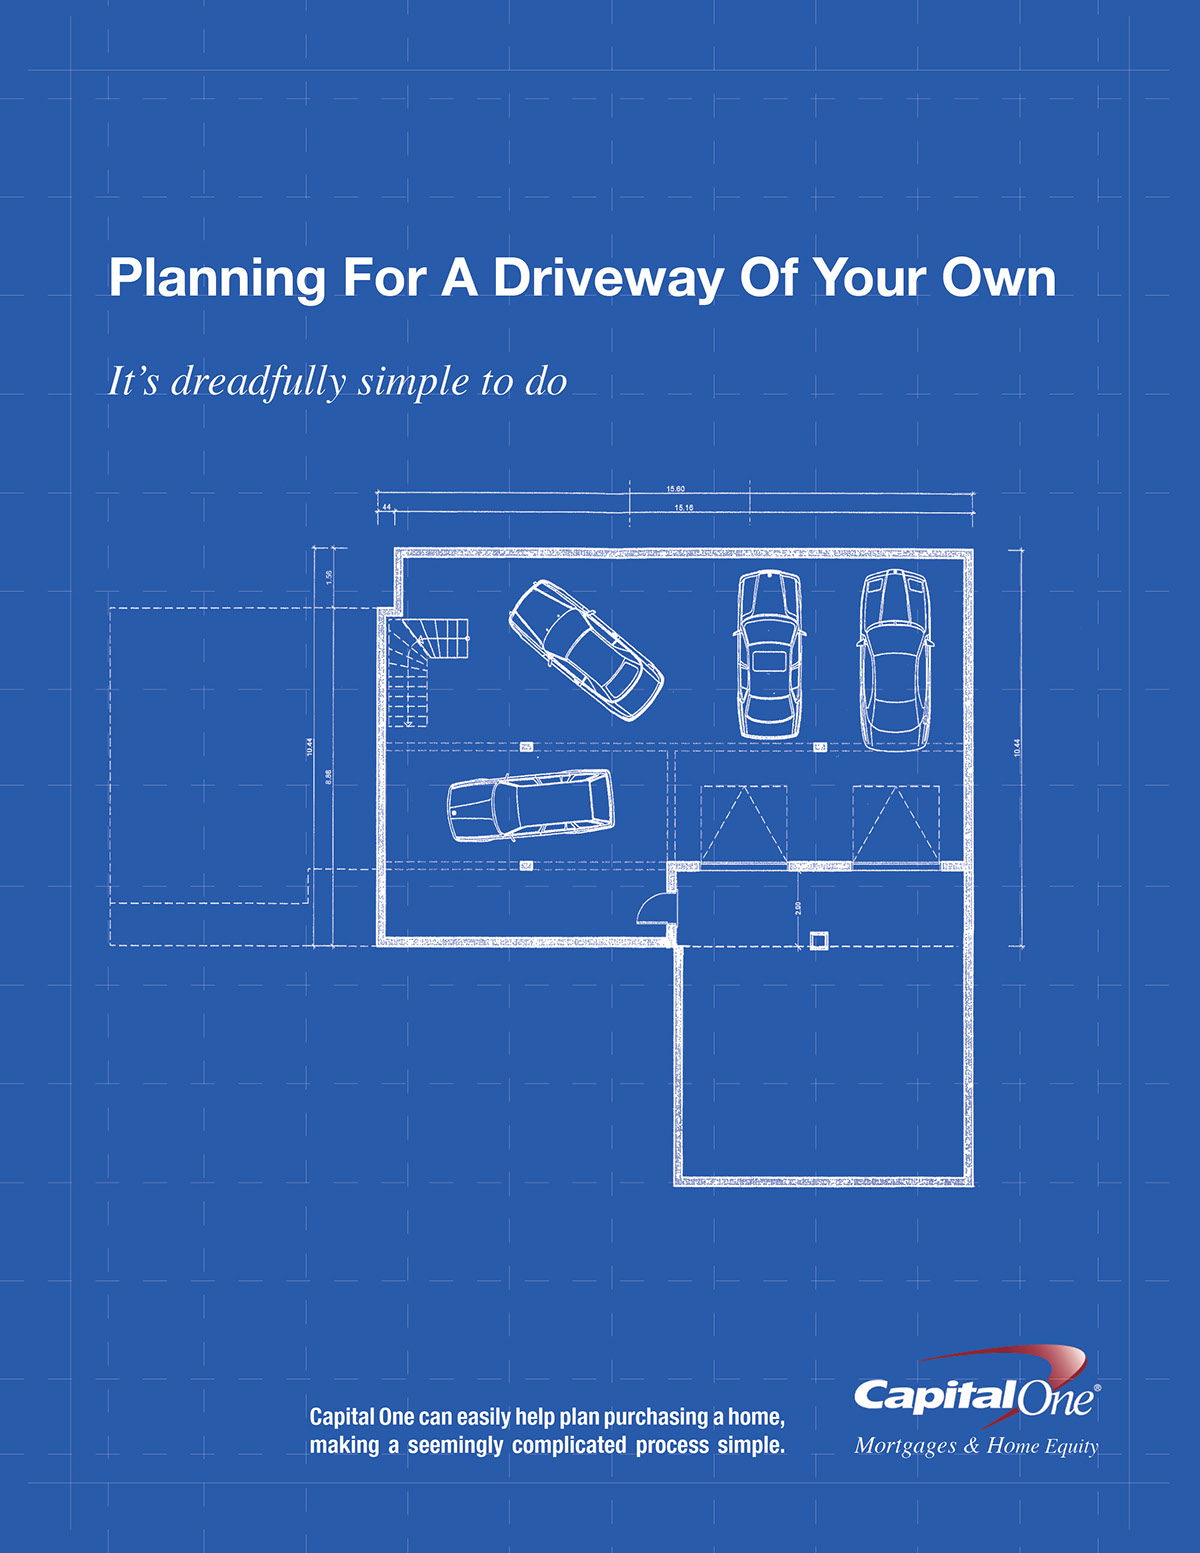 CapitalOne Mortgage HomeEquity planning simple